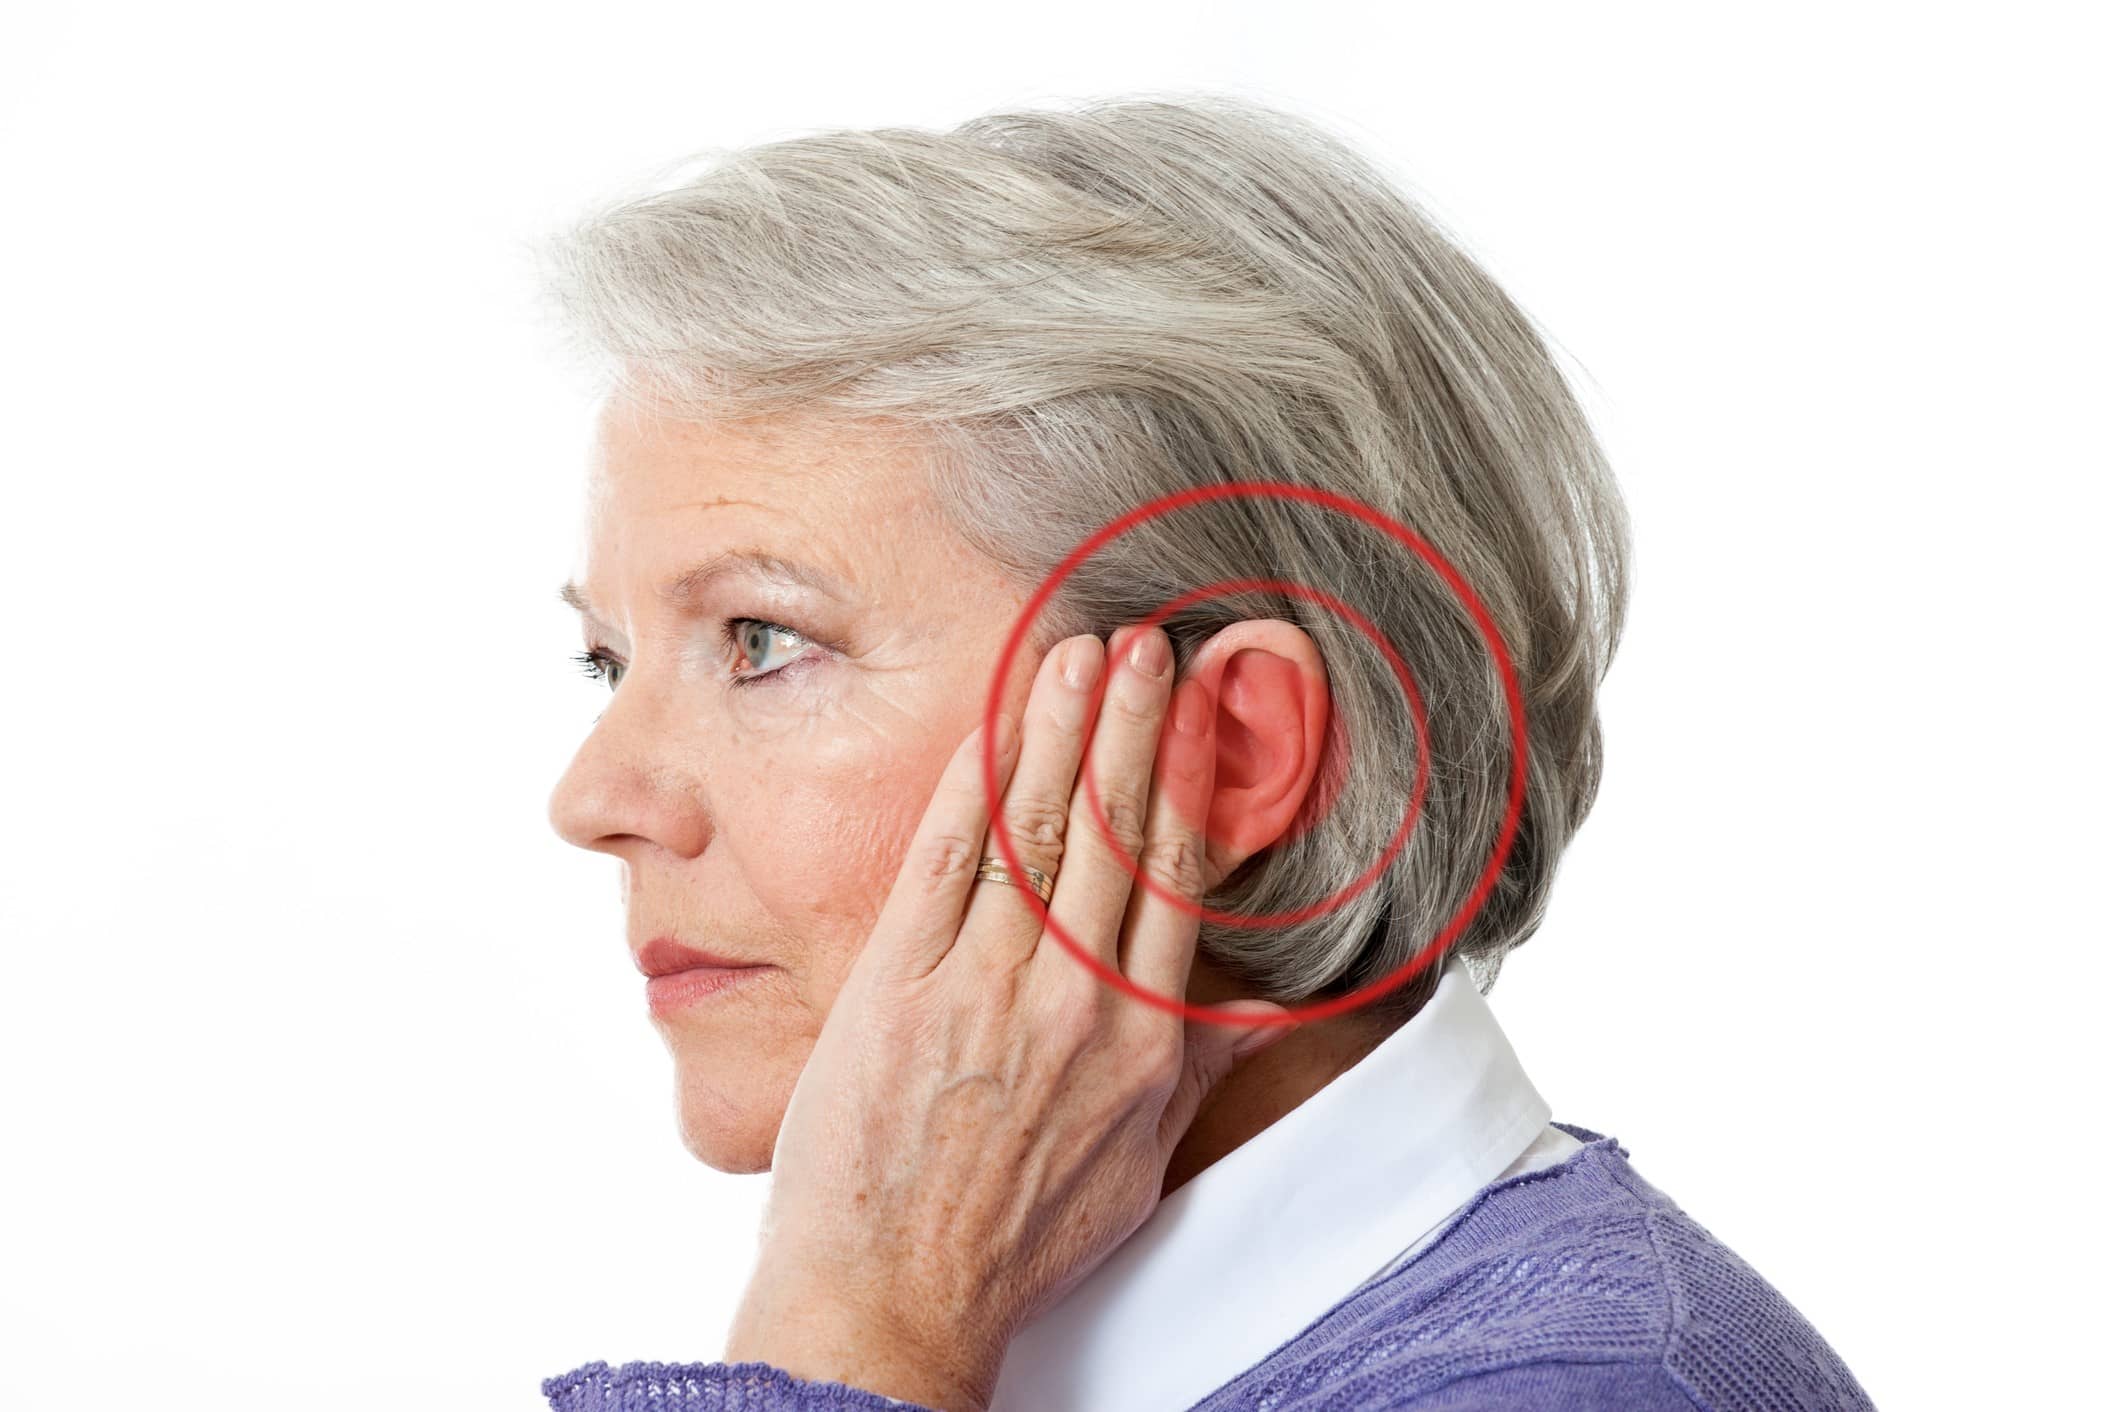 Tinnitus - Exercises and Stretches to Alleviate Symptoms